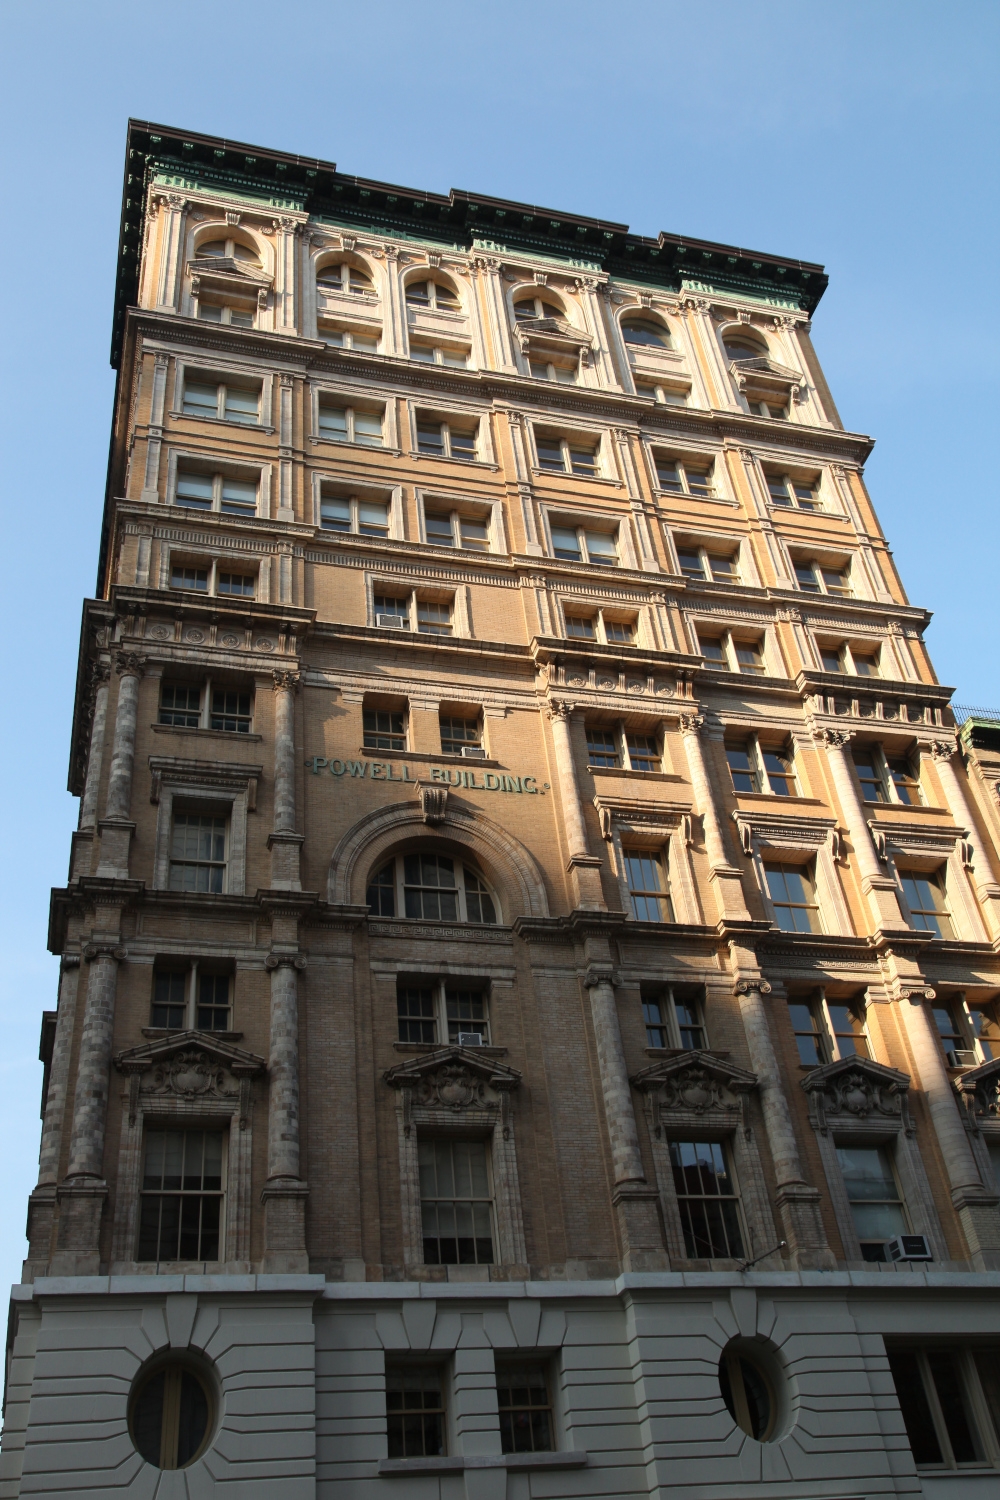 Full view of the Powell Building at 105 Hudson Street in New York City showcasing Jepol Construction's skilled brickwork, stone replacement, and stone restorations.